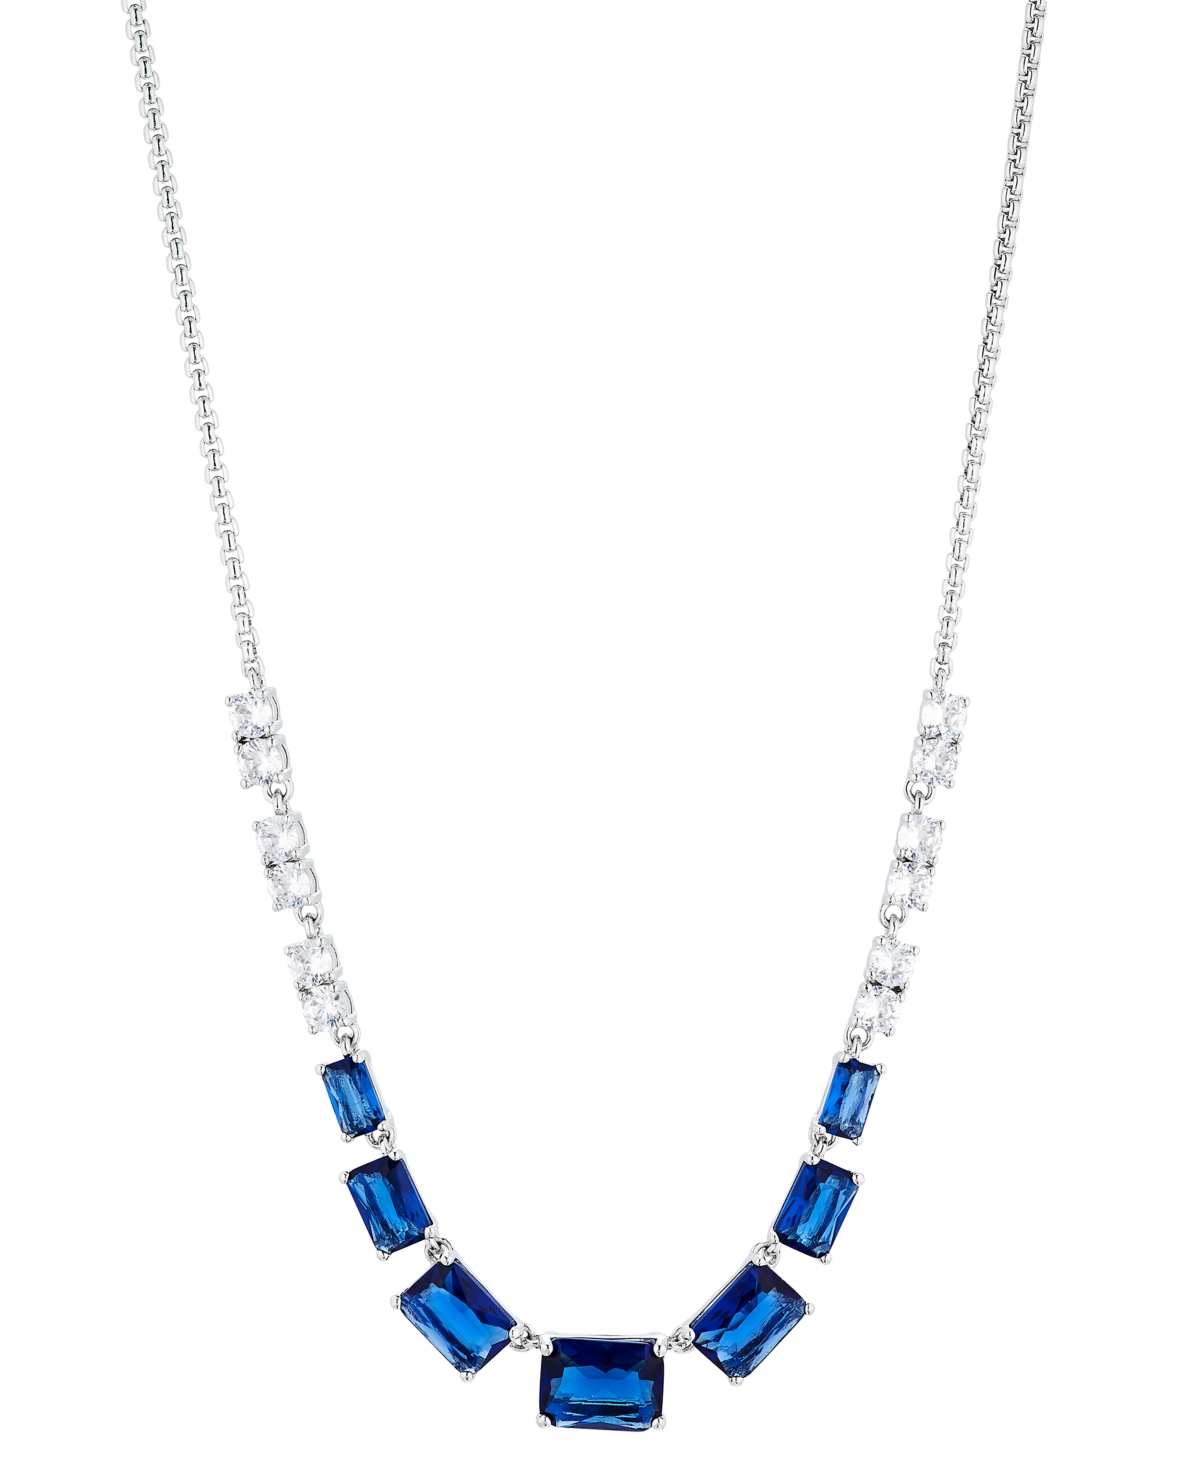 Eliot Danori Silver-tone Mixed Crystal Statement Necklace, 16" + 2" Extender, Created For Macy's